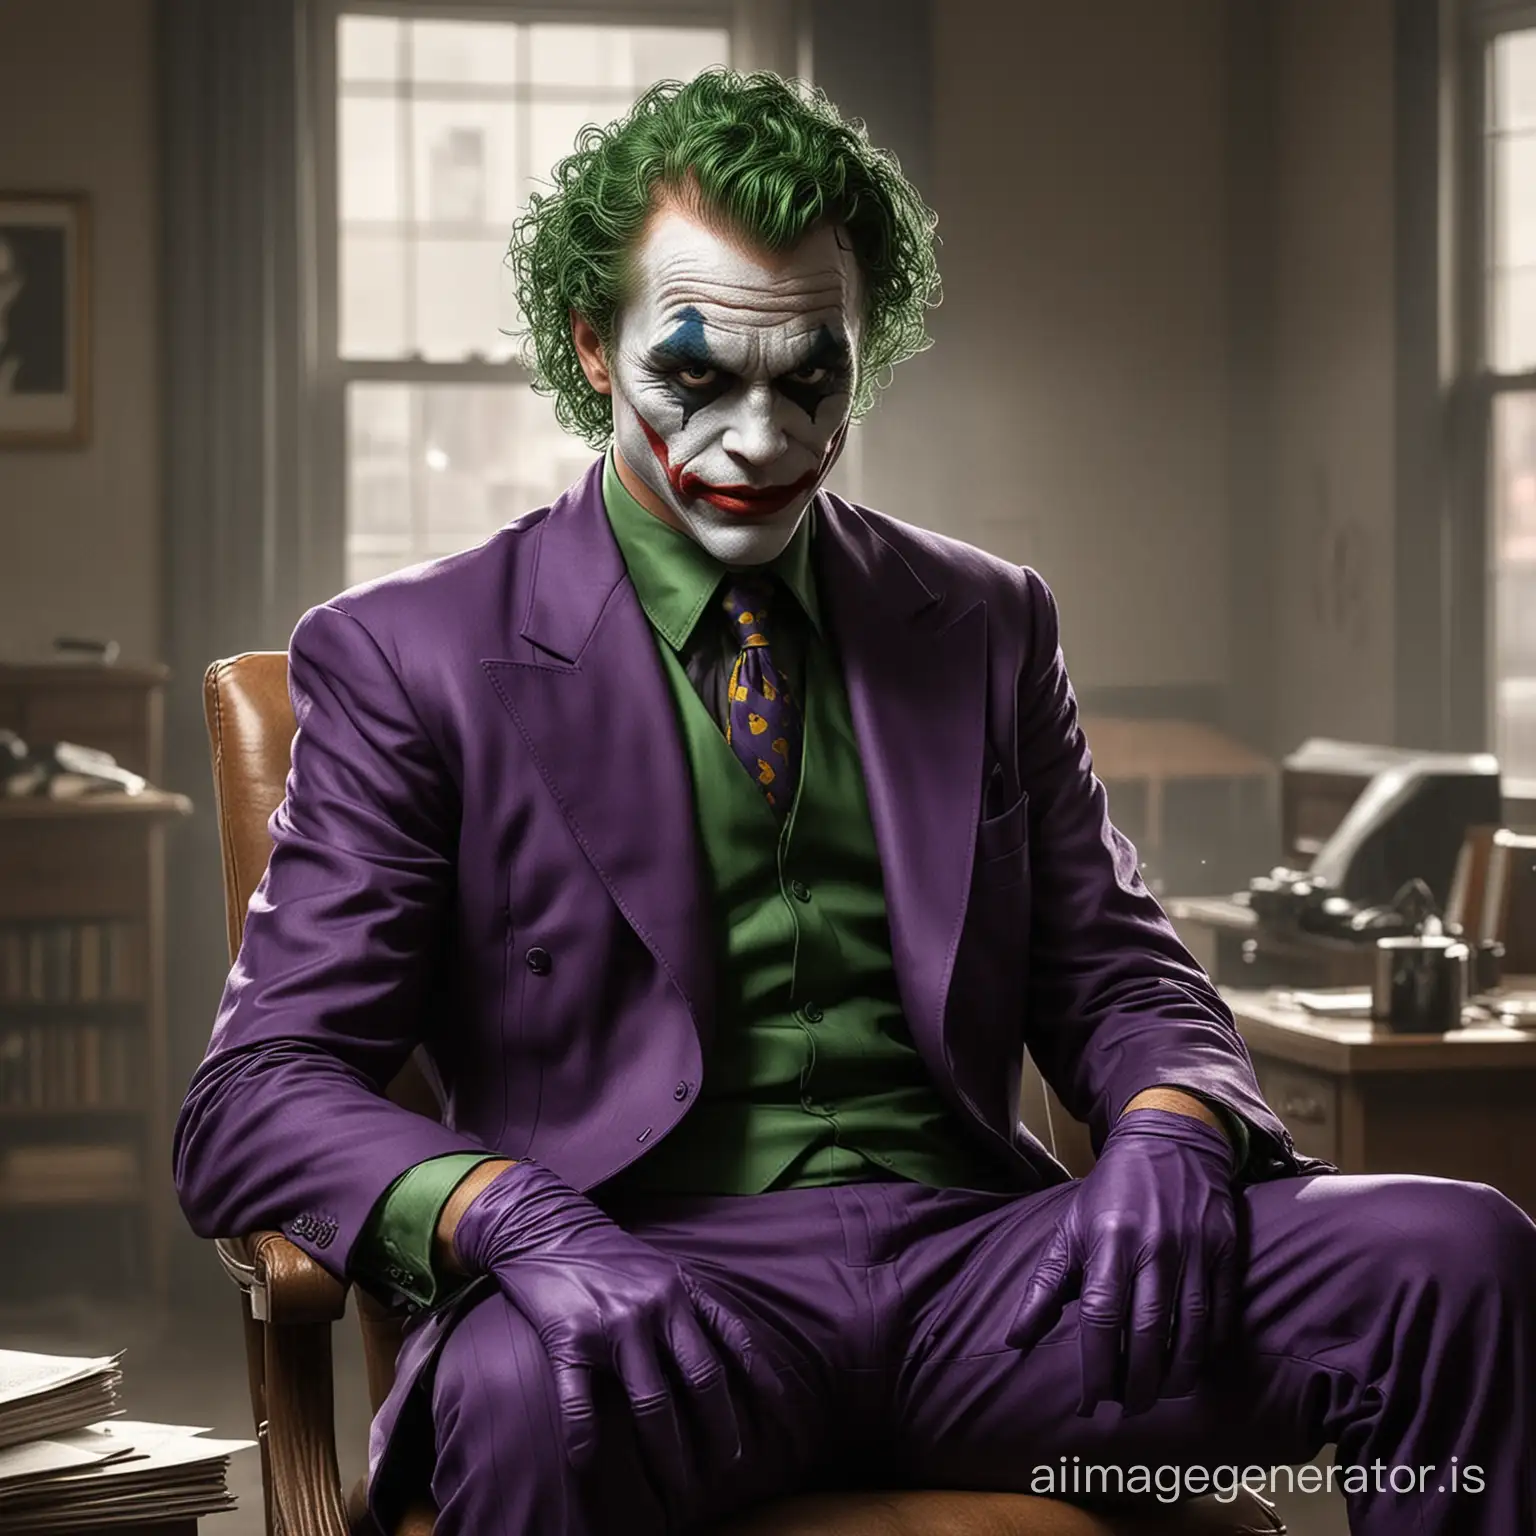 Realistic picture of Joker from the Batman comics. Accurate. The Joker is sitting on a chair in a 1930s office room. Joker as a retro gangster. Joker looks like in his very first appearance in comics. Joker with his suit from the old Batman comics by Bob Cane. Joker. Batman comics. Comicaccurate. Retro. Purple Suit from the comics. First Joker ever. First appearance in comics. Realistic. Live-action. Well dressed. Comicaccurate. Realistic. First Suit. Epic. Heroic. Villain. He has short green curly hair. Gangster Boss. 1930s comics. Short hair.